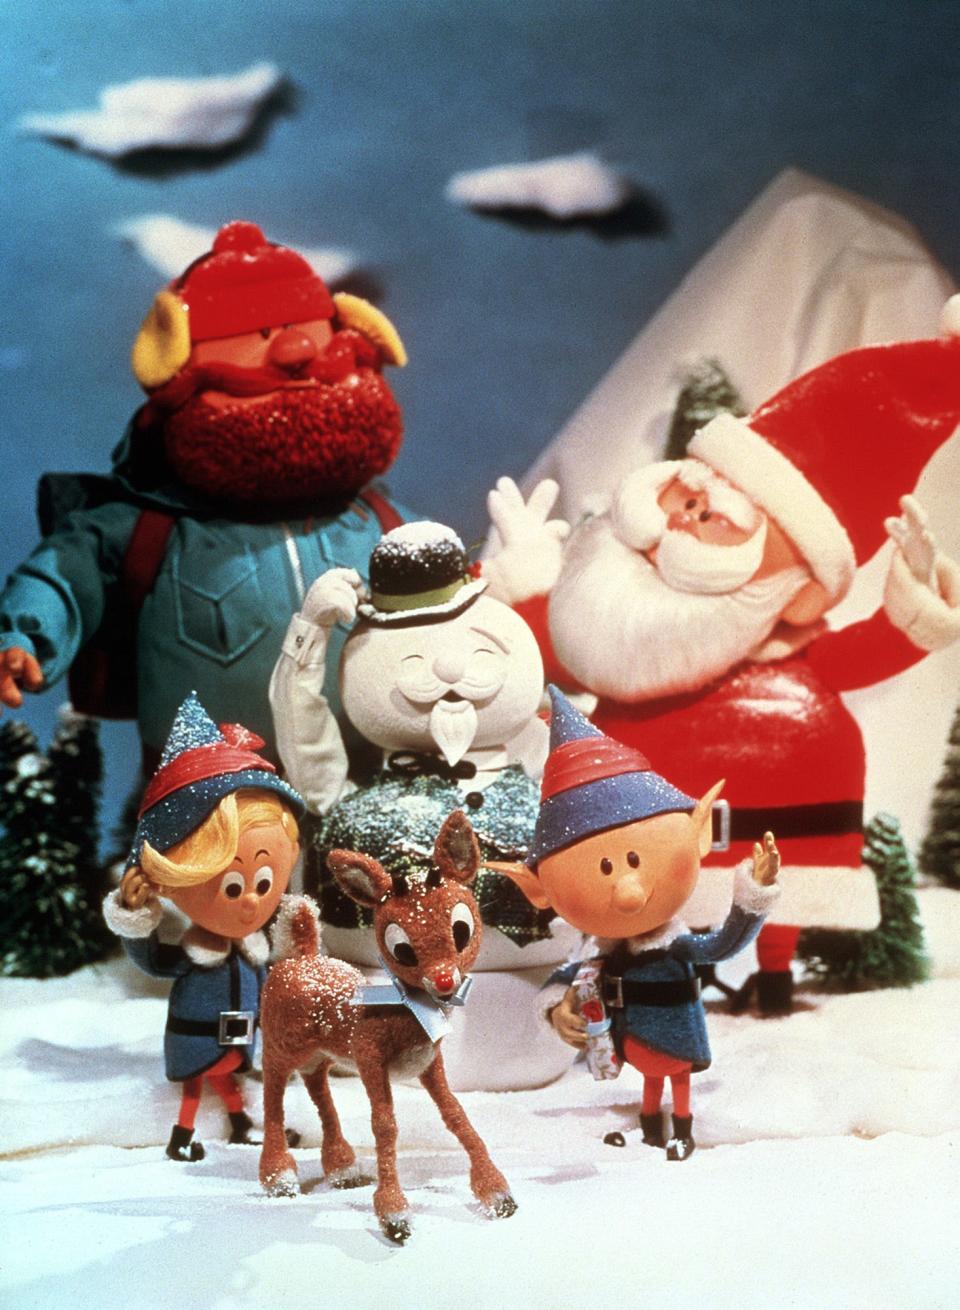 The navigational prowess of "the most famous reindeer of all" will again illuminate Santa Claus' way into the Christmas season with the digitally remastered version of "Rudolph the Red-Nosed Reindeer."